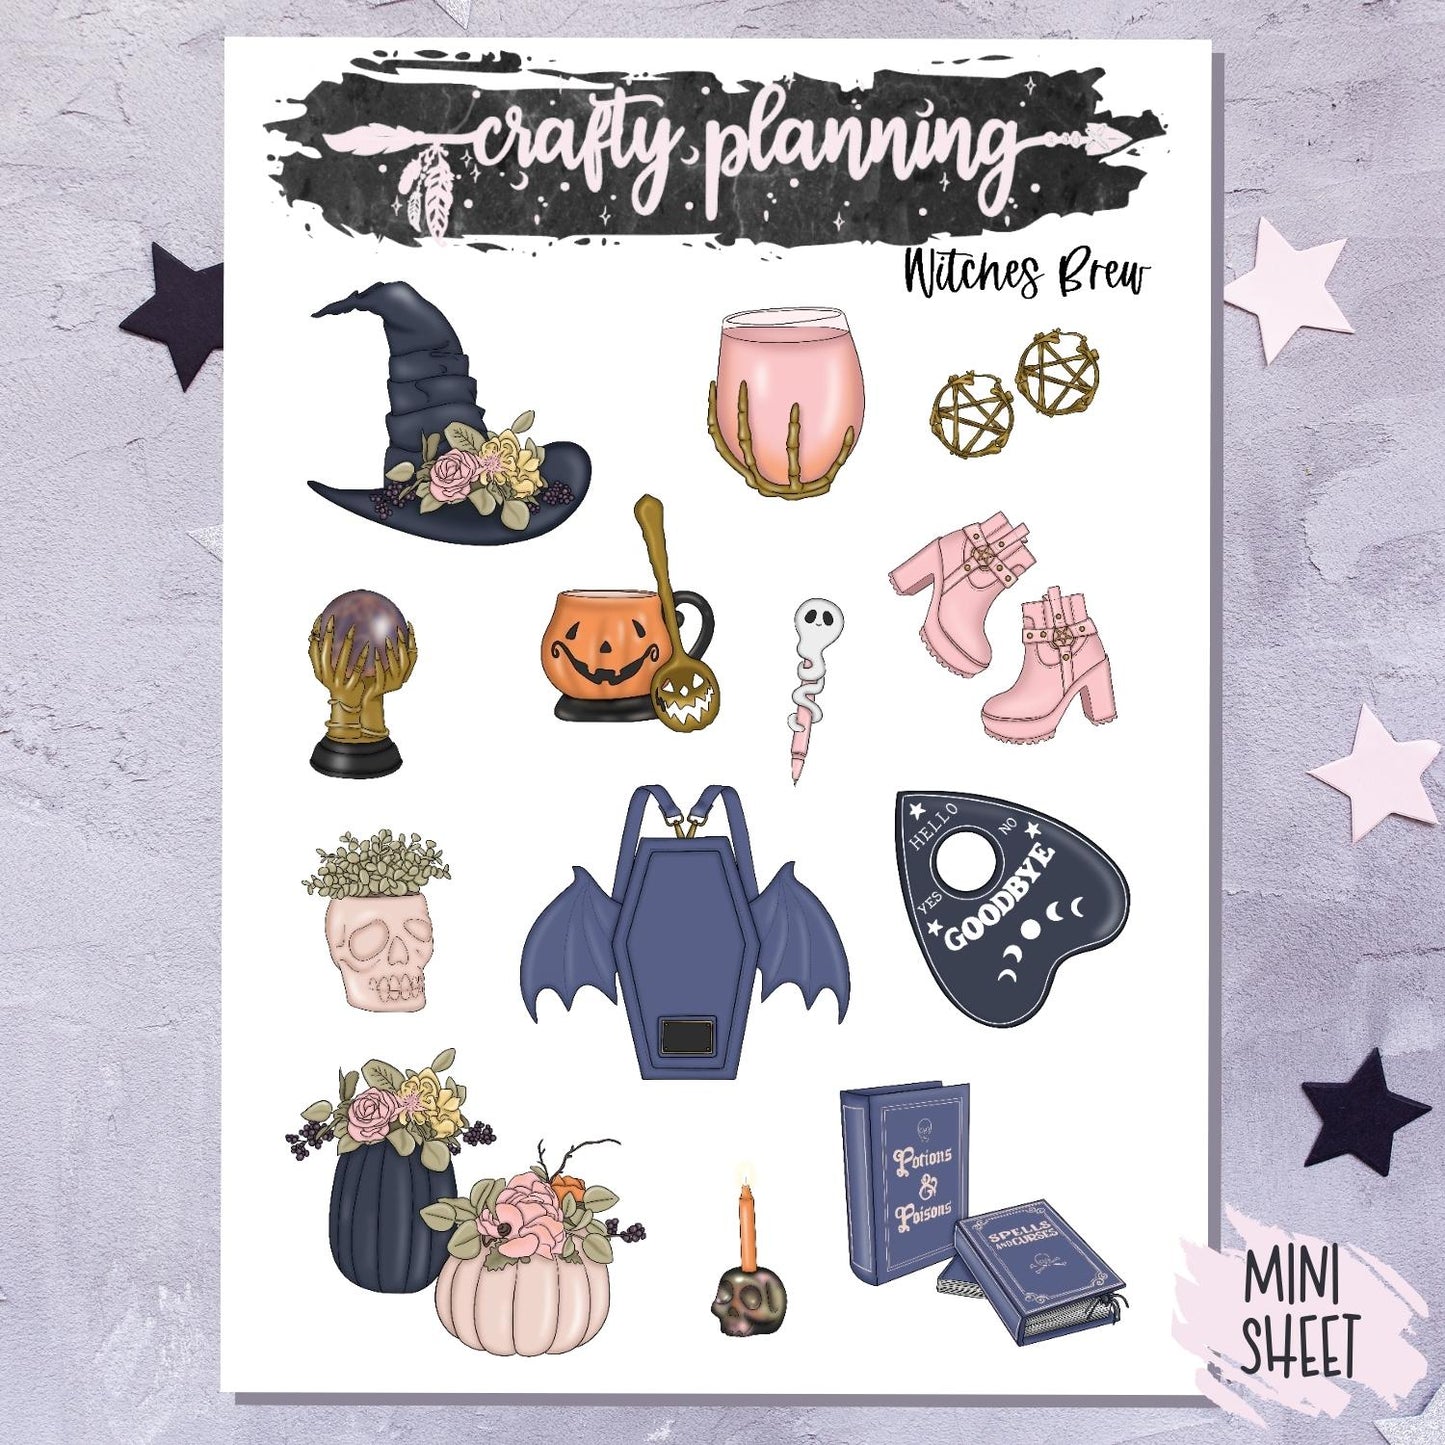 Witches Brew - Skin Tone Options - A La Carte - Weekly Vertical Planner Kit